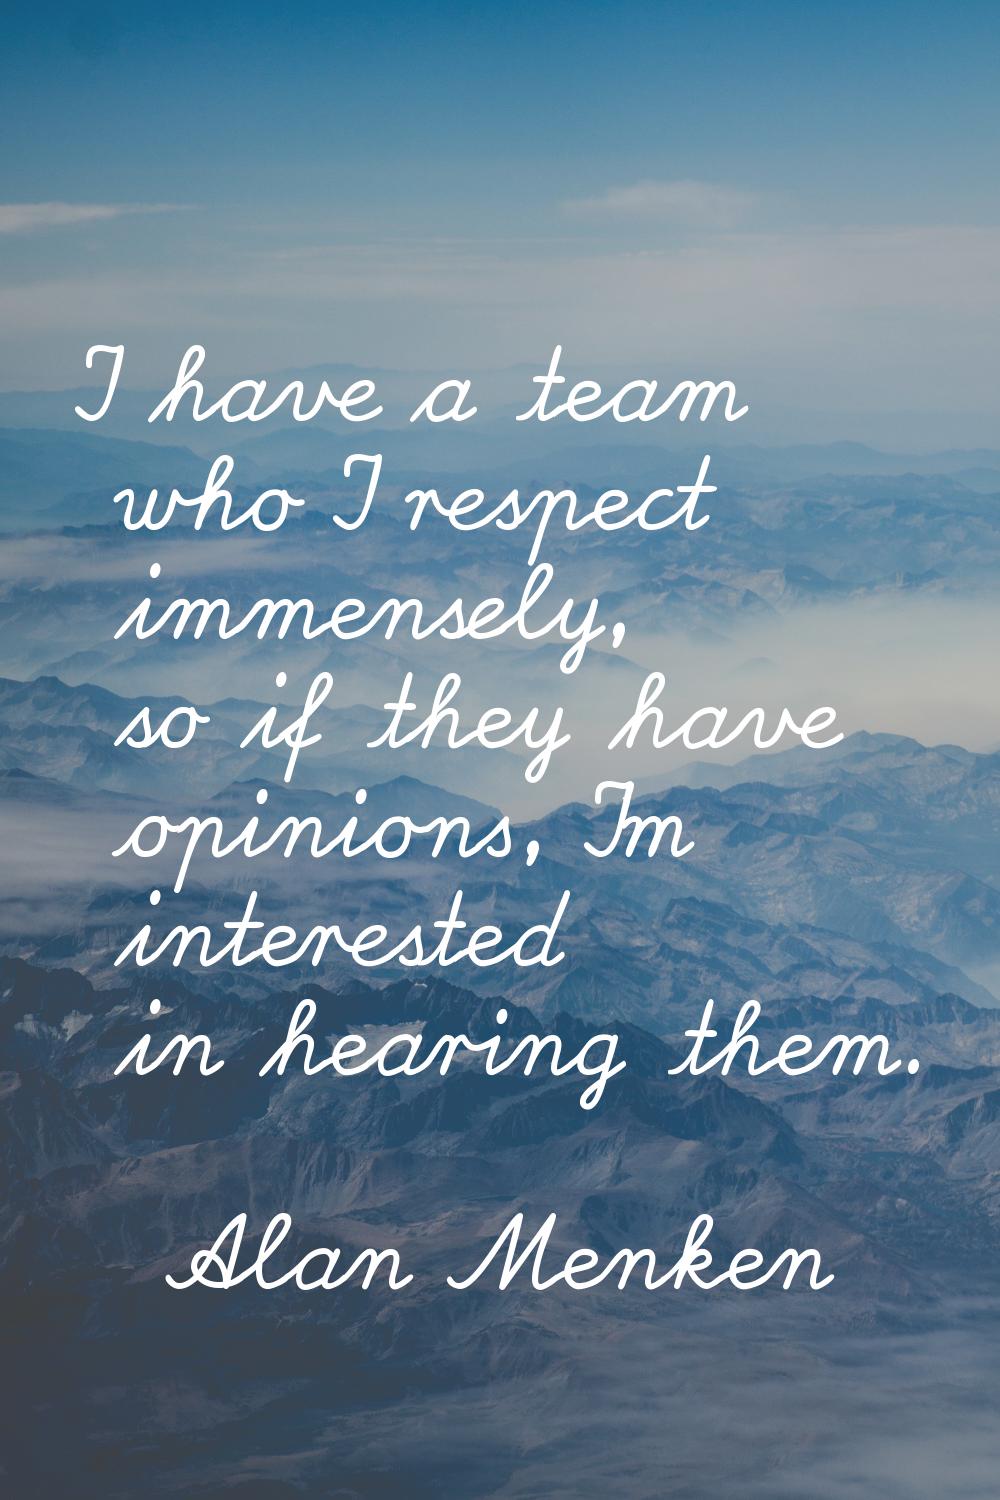 I have a team who I respect immensely, so if they have opinions, I'm interested in hearing them.